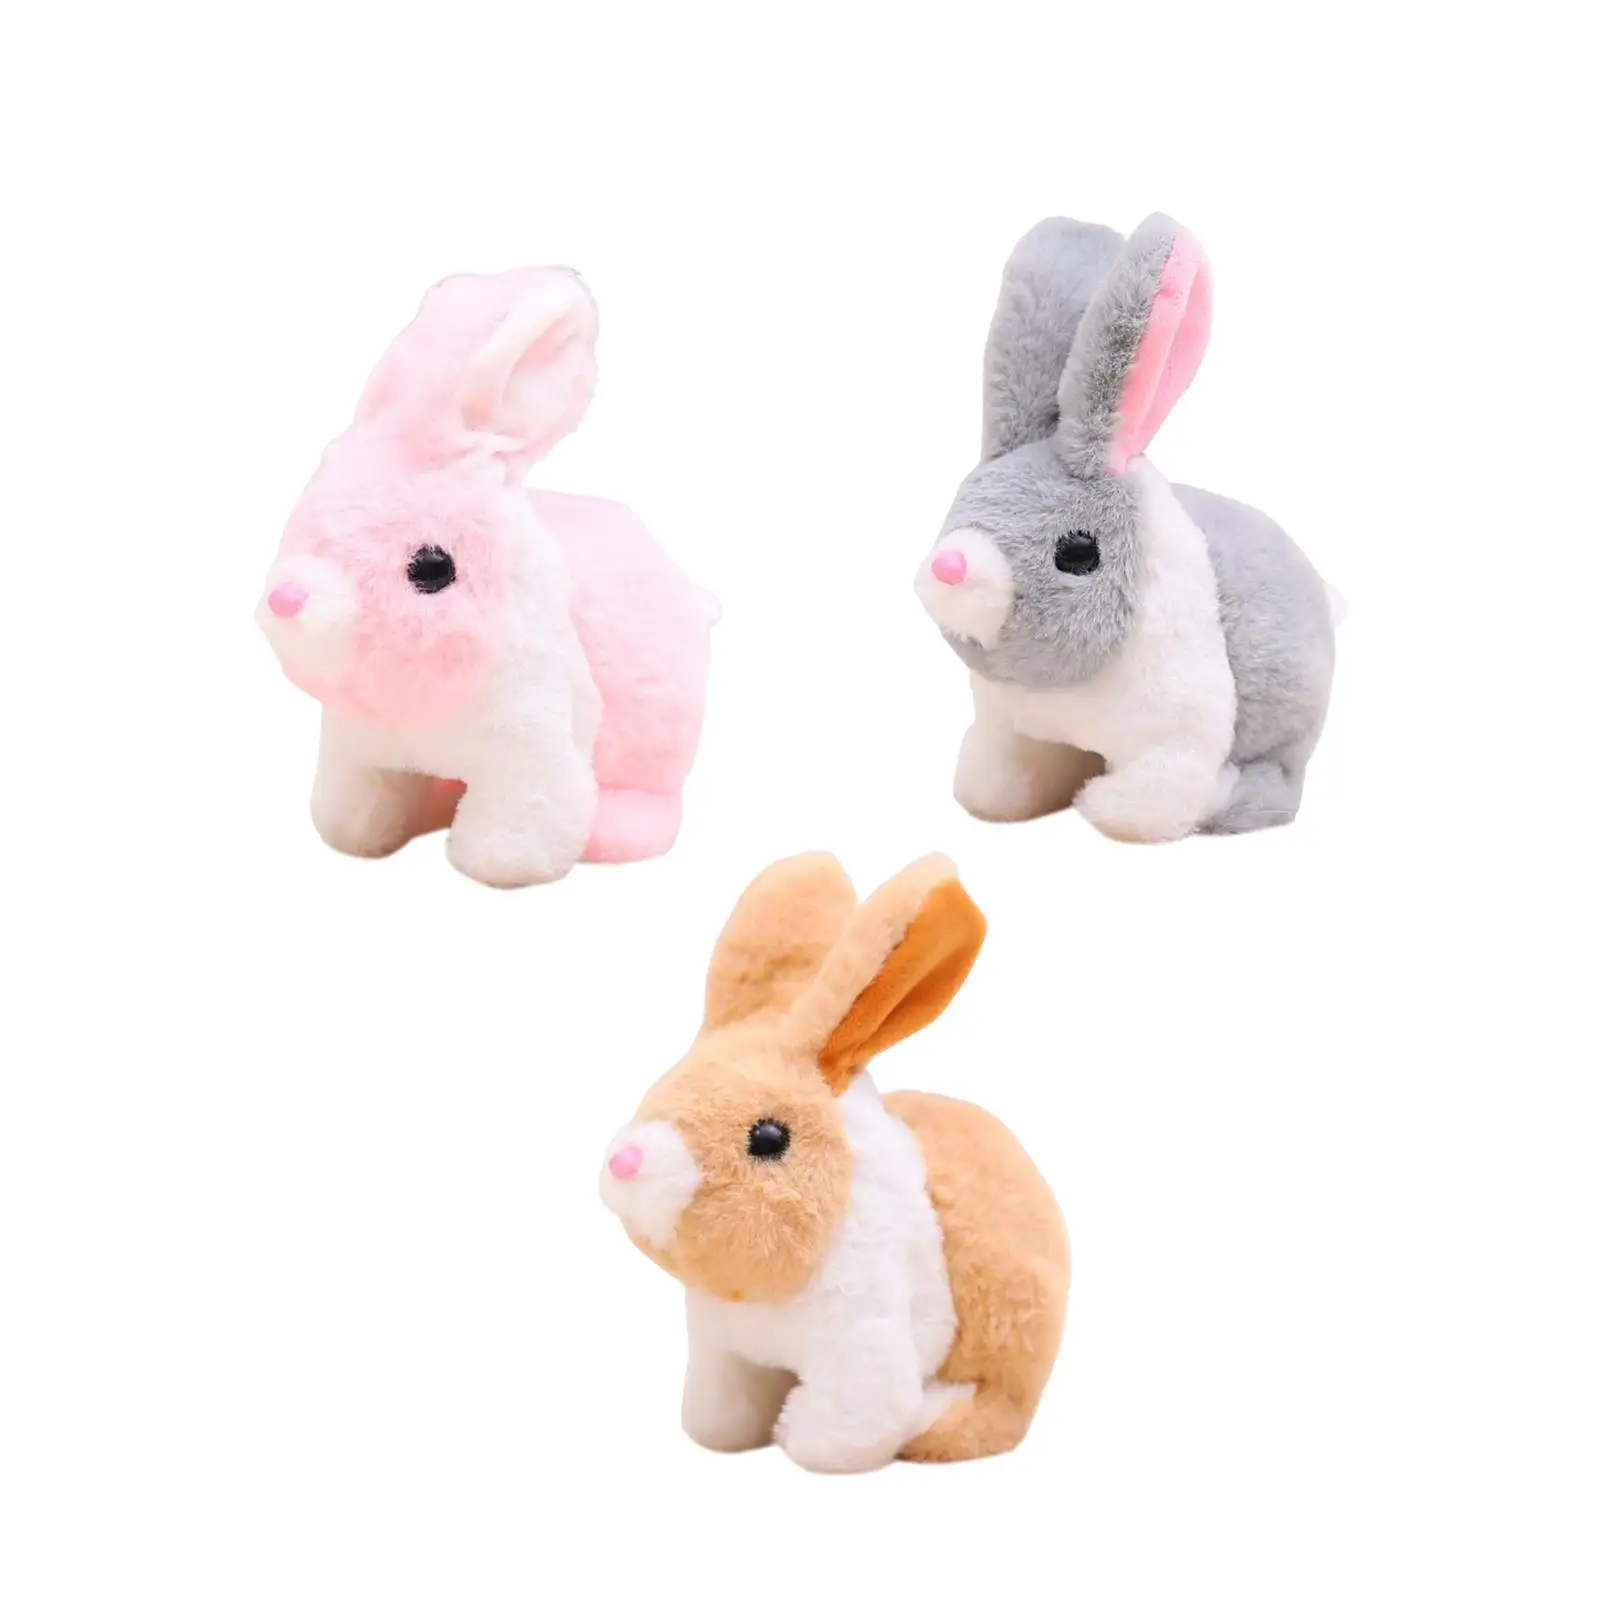 Electric Bunny Toys Wiggling Ears Early Education Novelty for Bedtime Friend